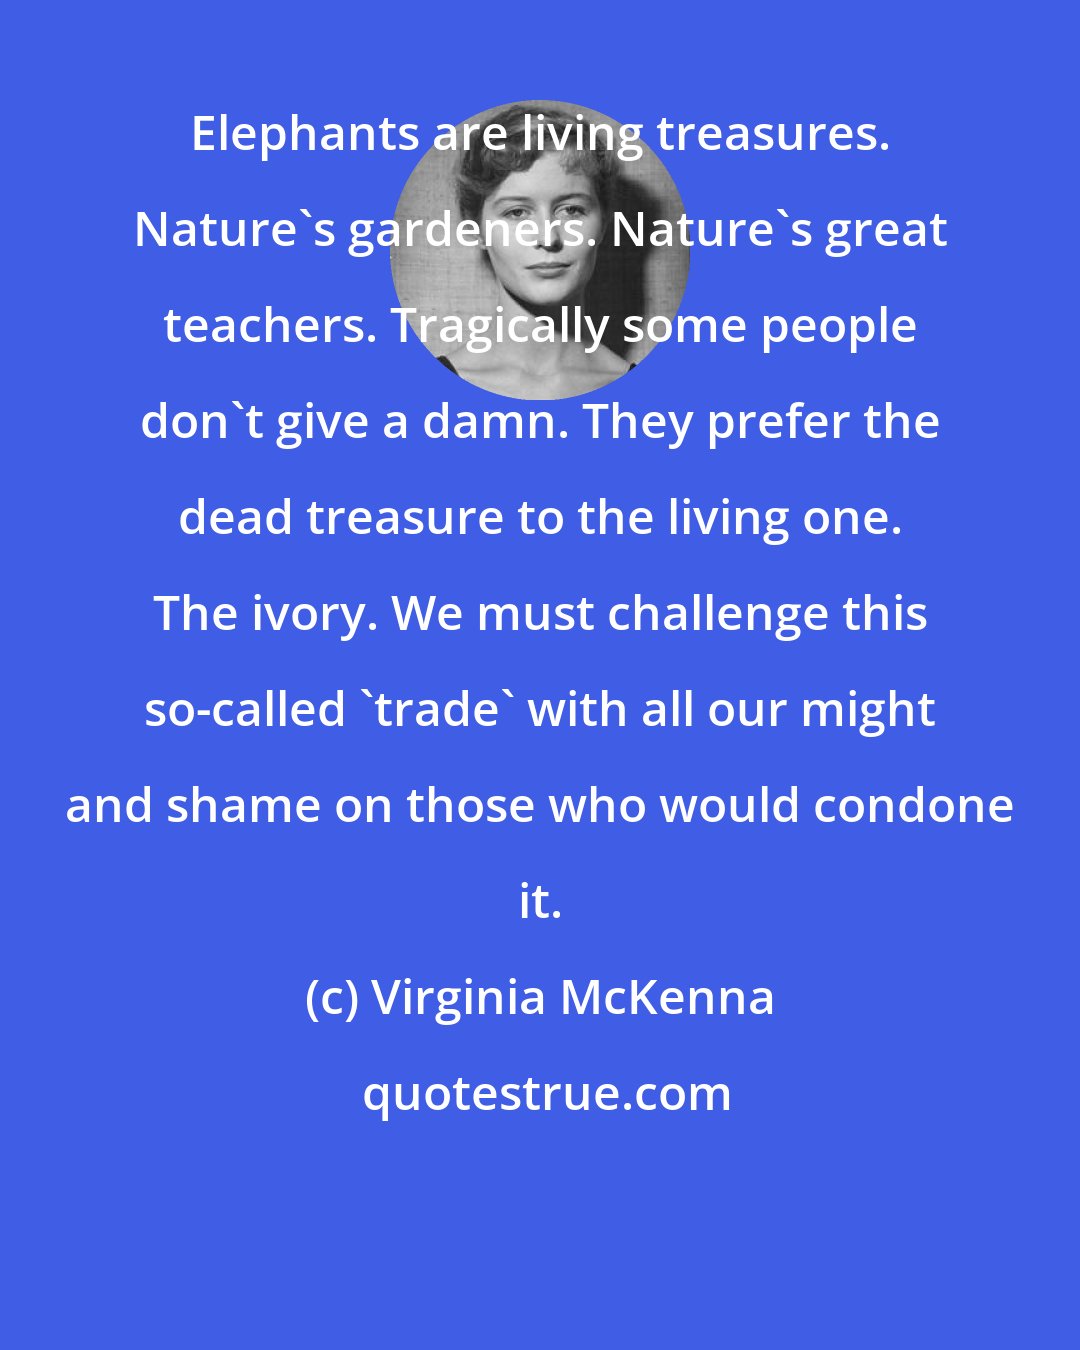 Virginia McKenna: Elephants are living treasures. Nature's gardeners. Nature's great teachers. Tragically some people don't give a damn. They prefer the dead treasure to the living one. The ivory. We must challenge this so-called 'trade' with all our might and shame on those who would condone it.